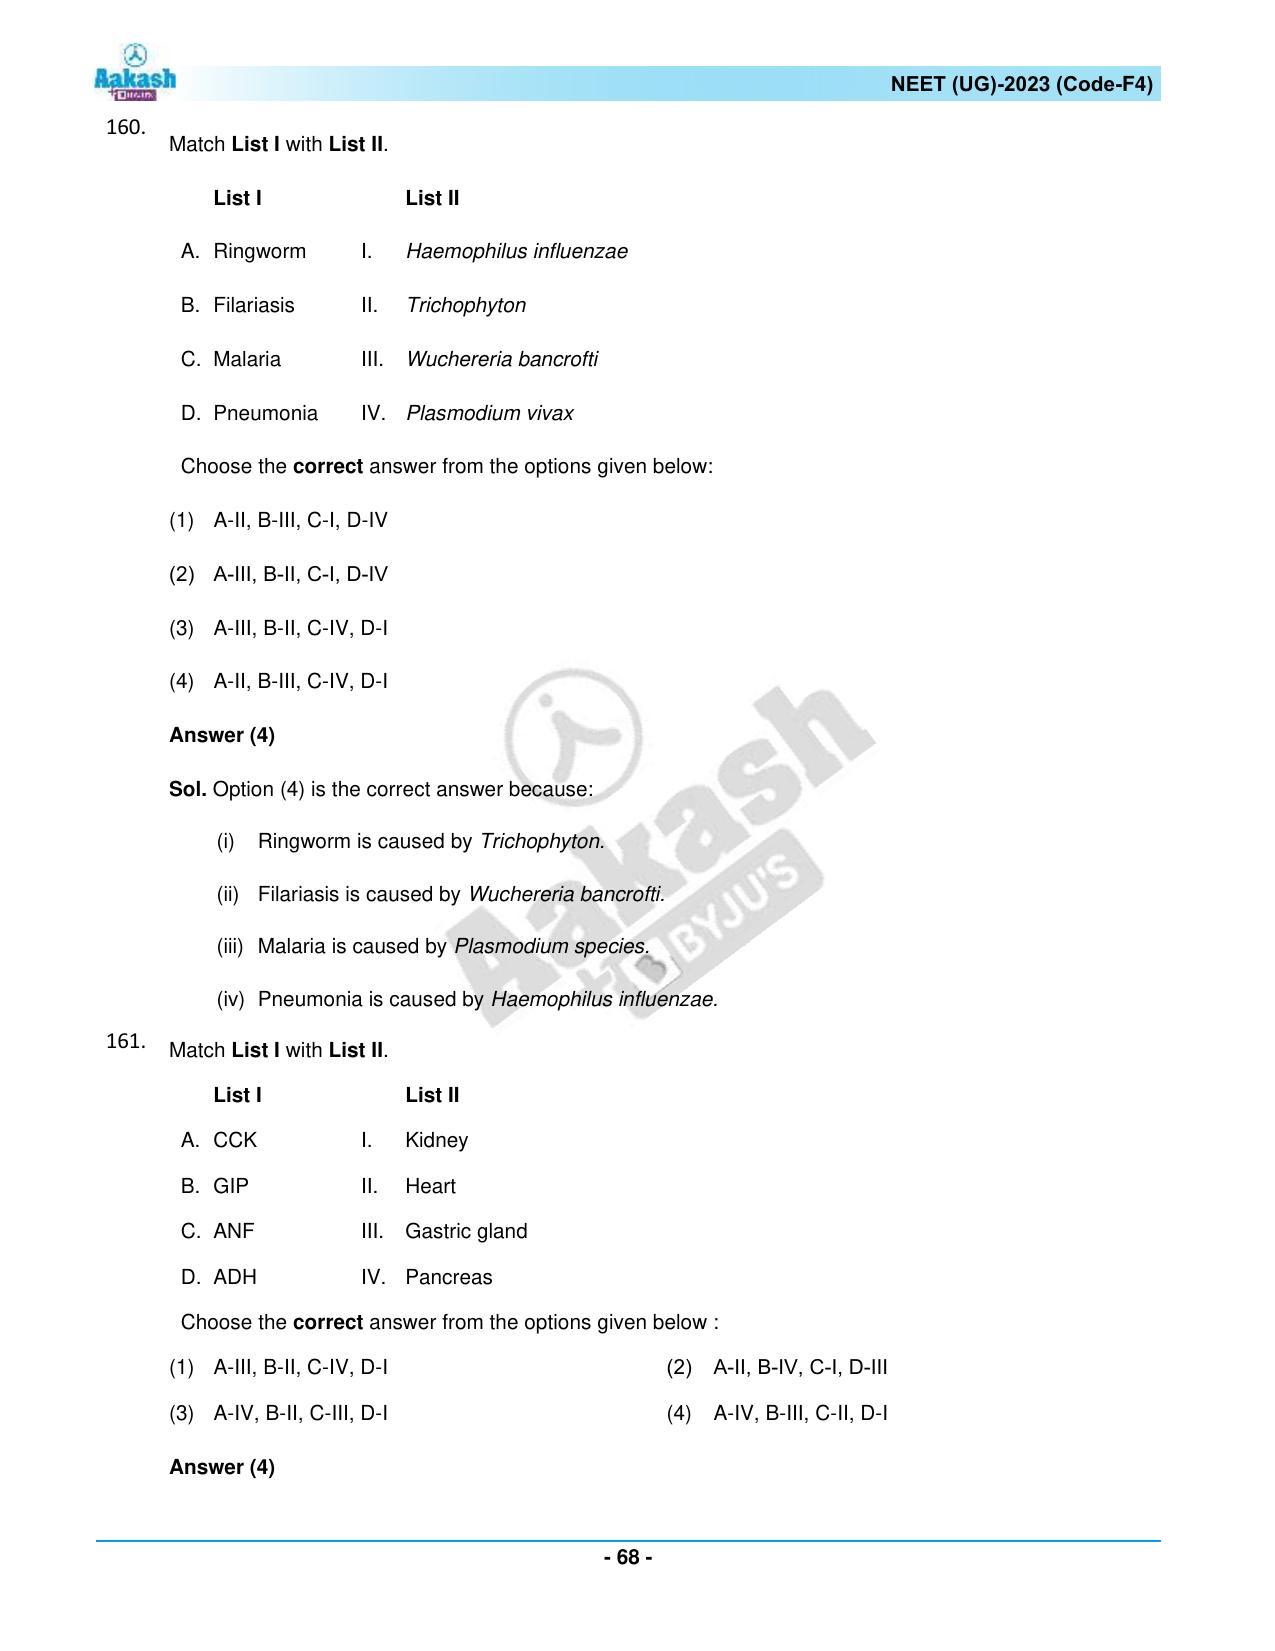 NEET 2023 Question Paper F4 - Page 68